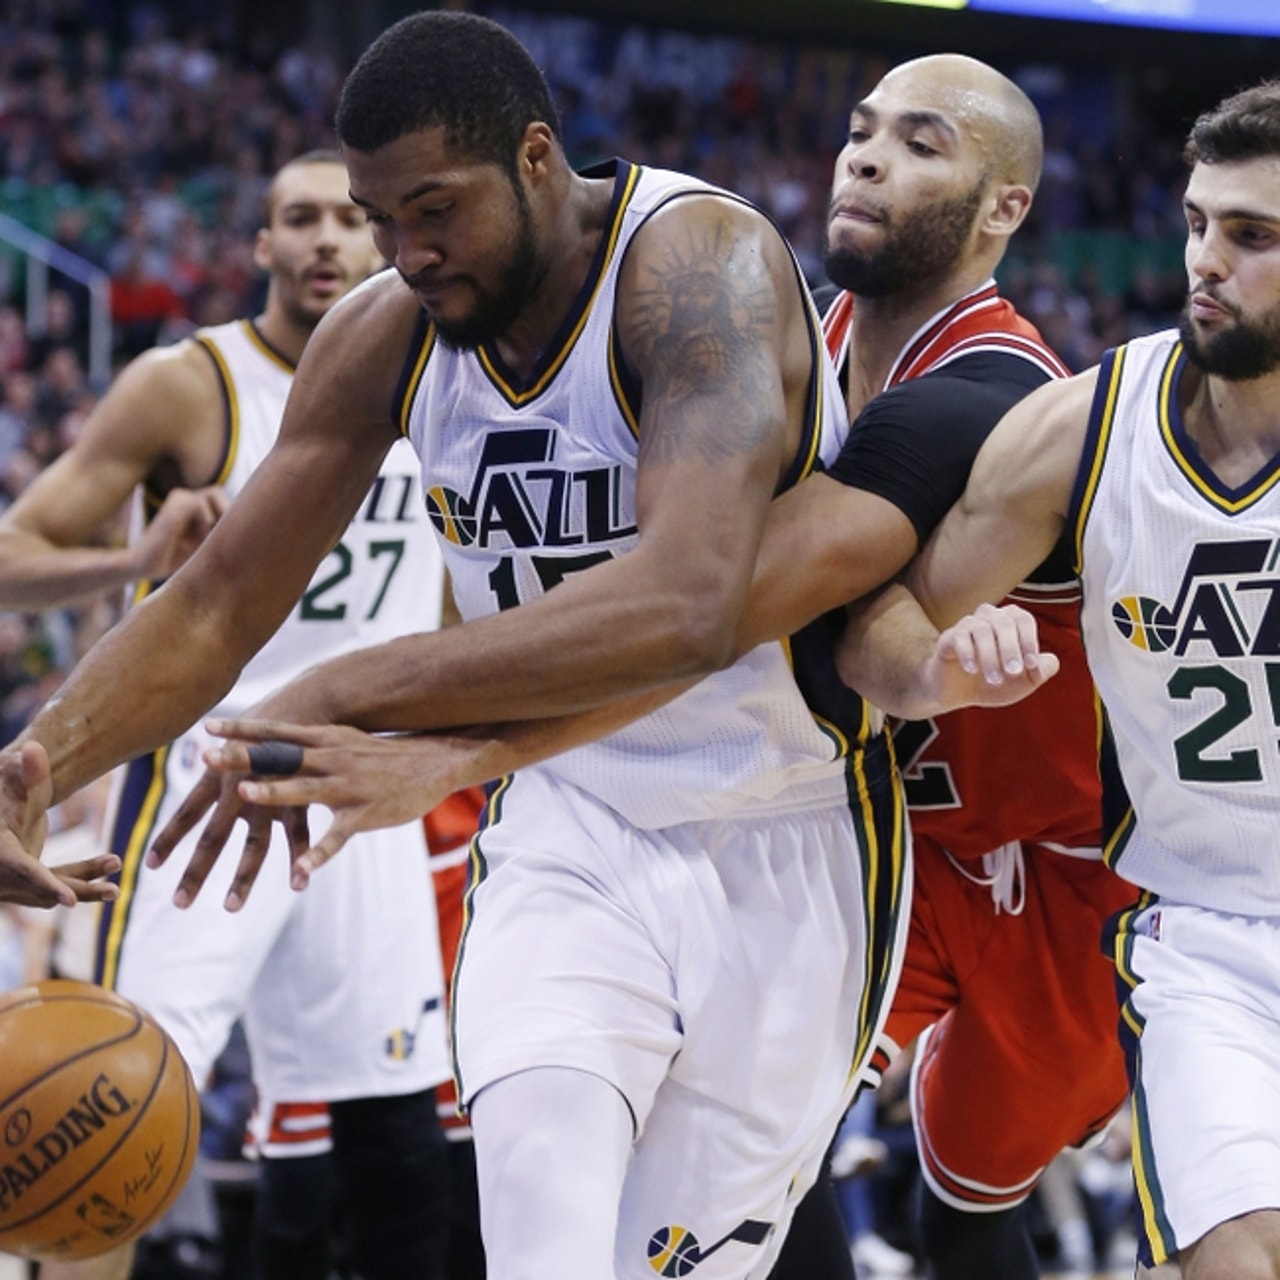 Derrick Favors seeks to return to the NBA with the Chicago Bulls